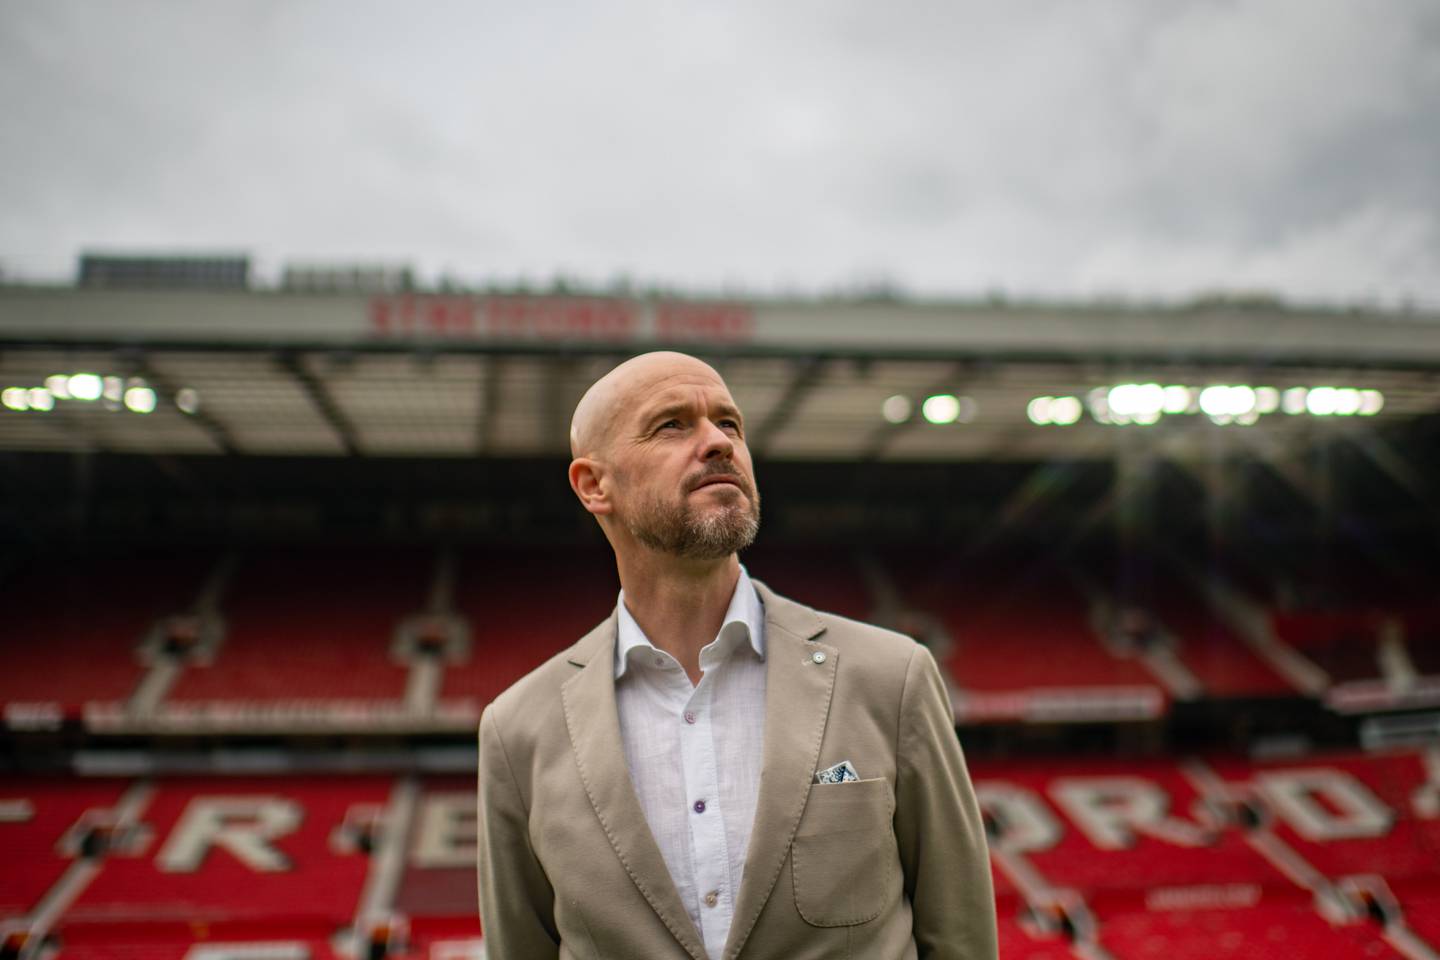 Erik ten Hag is looking to shape his Manchester United squad ahead of his debut season, with Frenkie De Jong and Lisandro Lopez understood to be his top transfer targets. PA